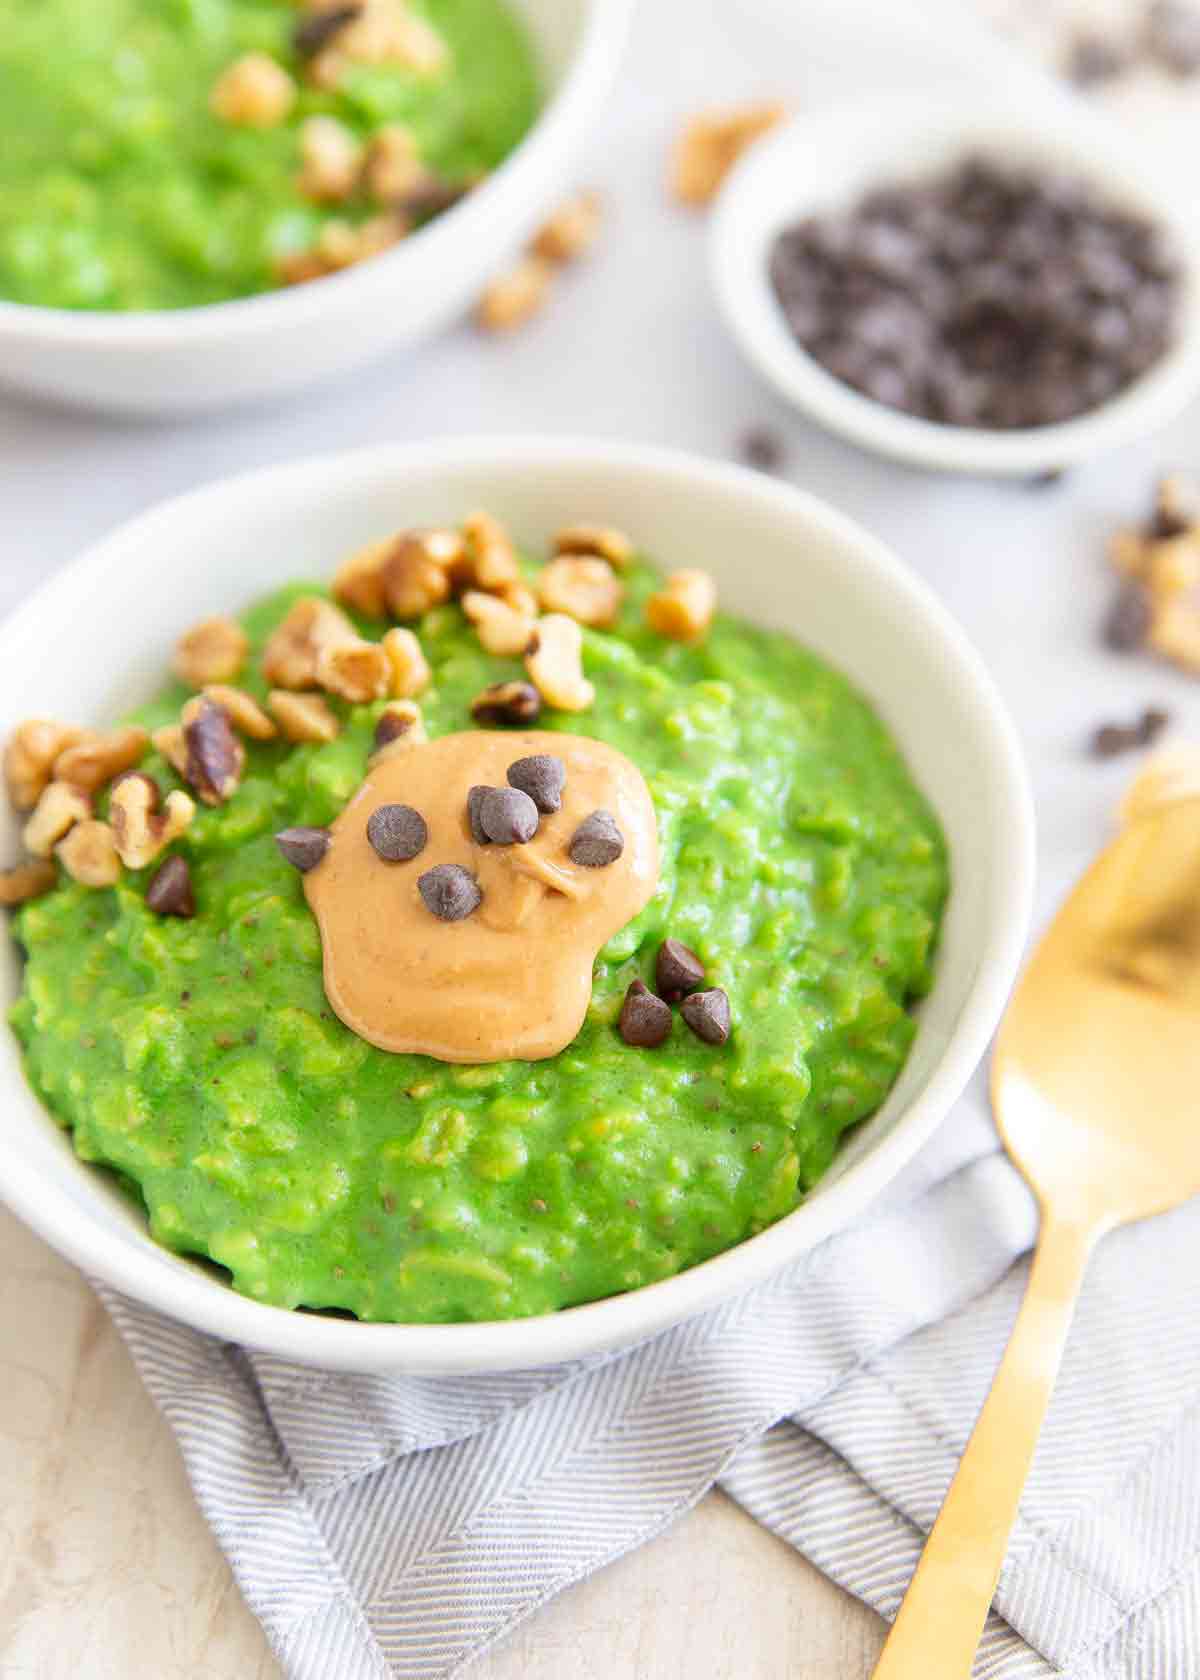 This green oatmeal is the perfect St. Patrick's Day breakfast recipe. Made with spinach, oats, bananas, milk it's a festive and healthy start to the day.